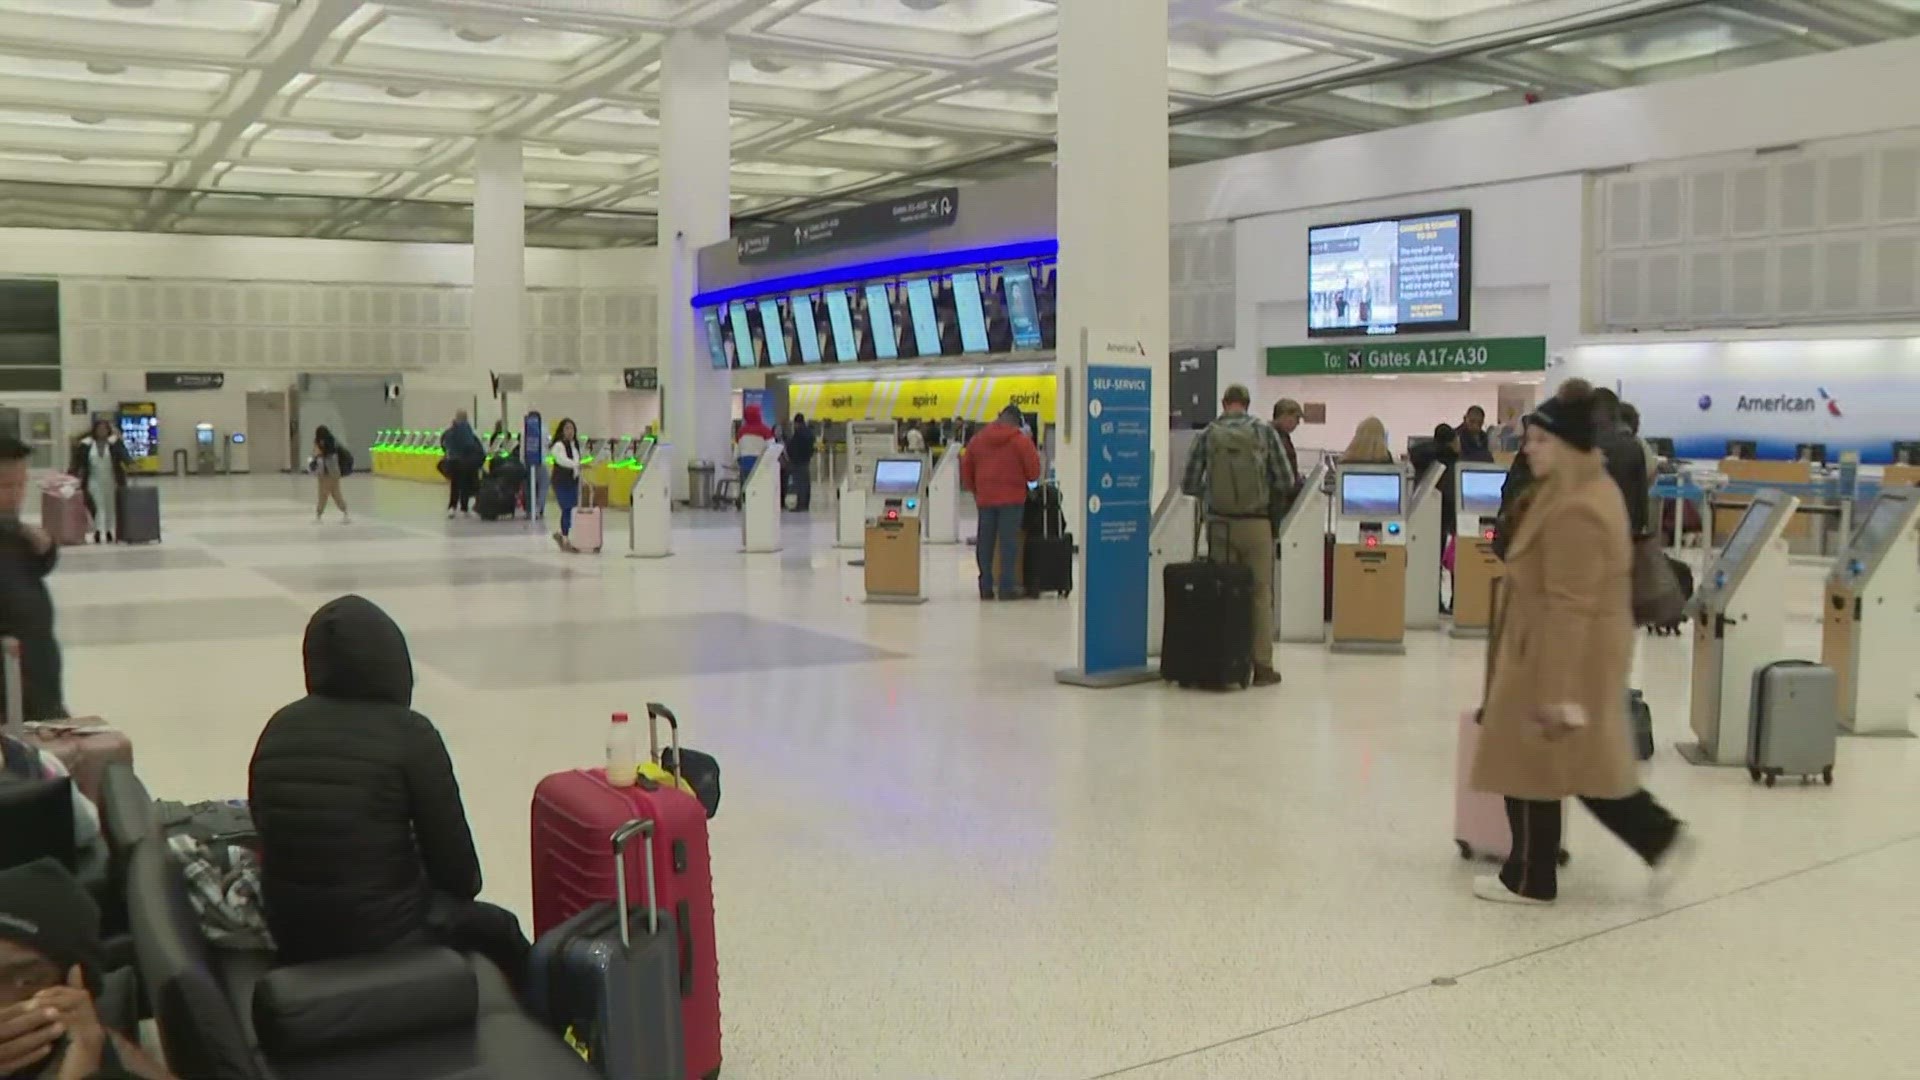 Airport officials are asking travelers to check their flight status frequently as freezing temps are still a concern.